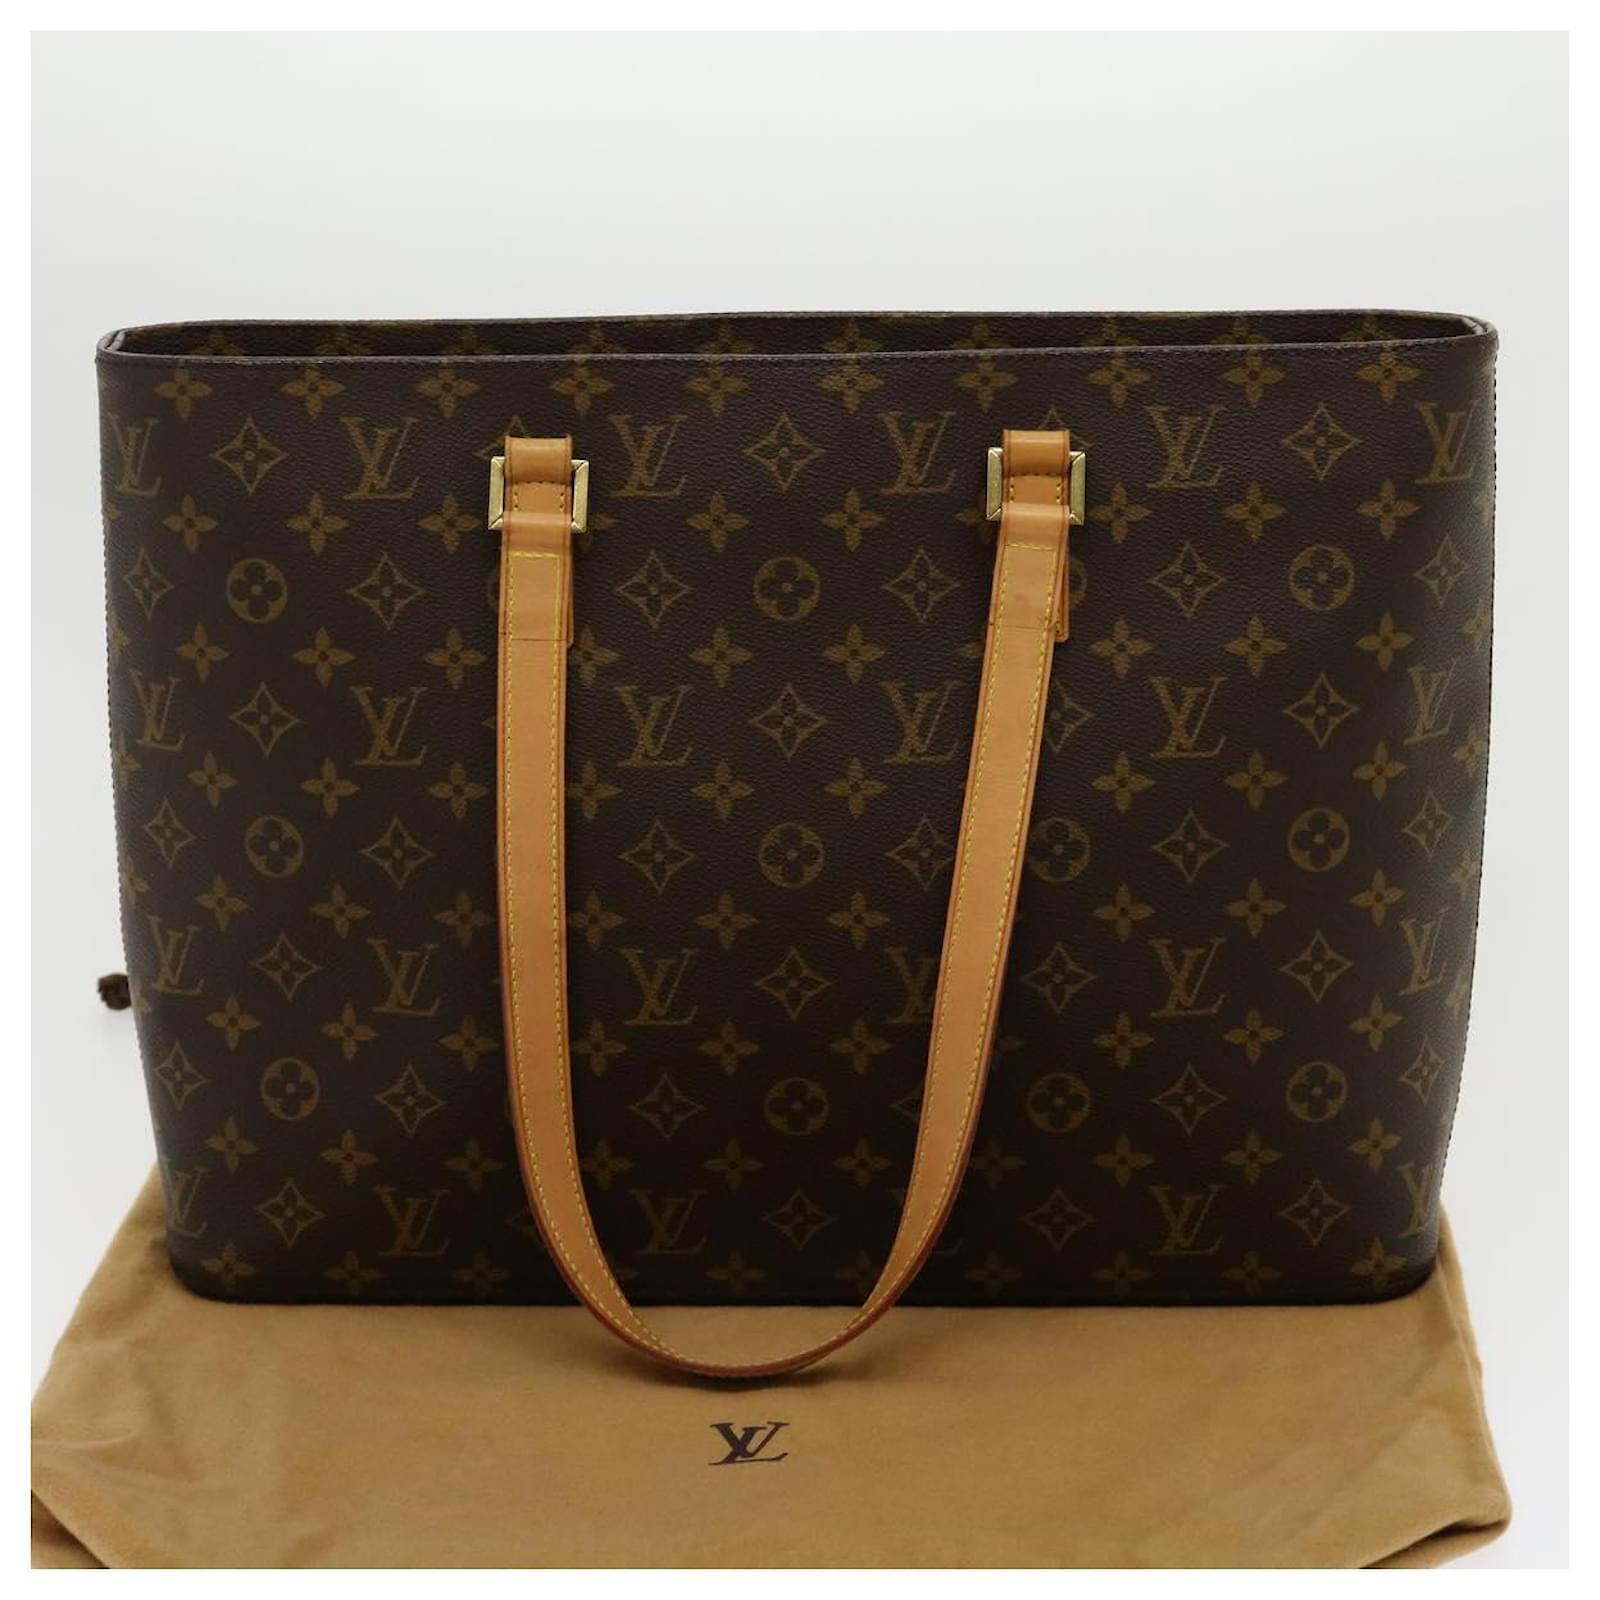 LOUIS VUITTON Luco tote bag M51155｜Product Code：2109200077404